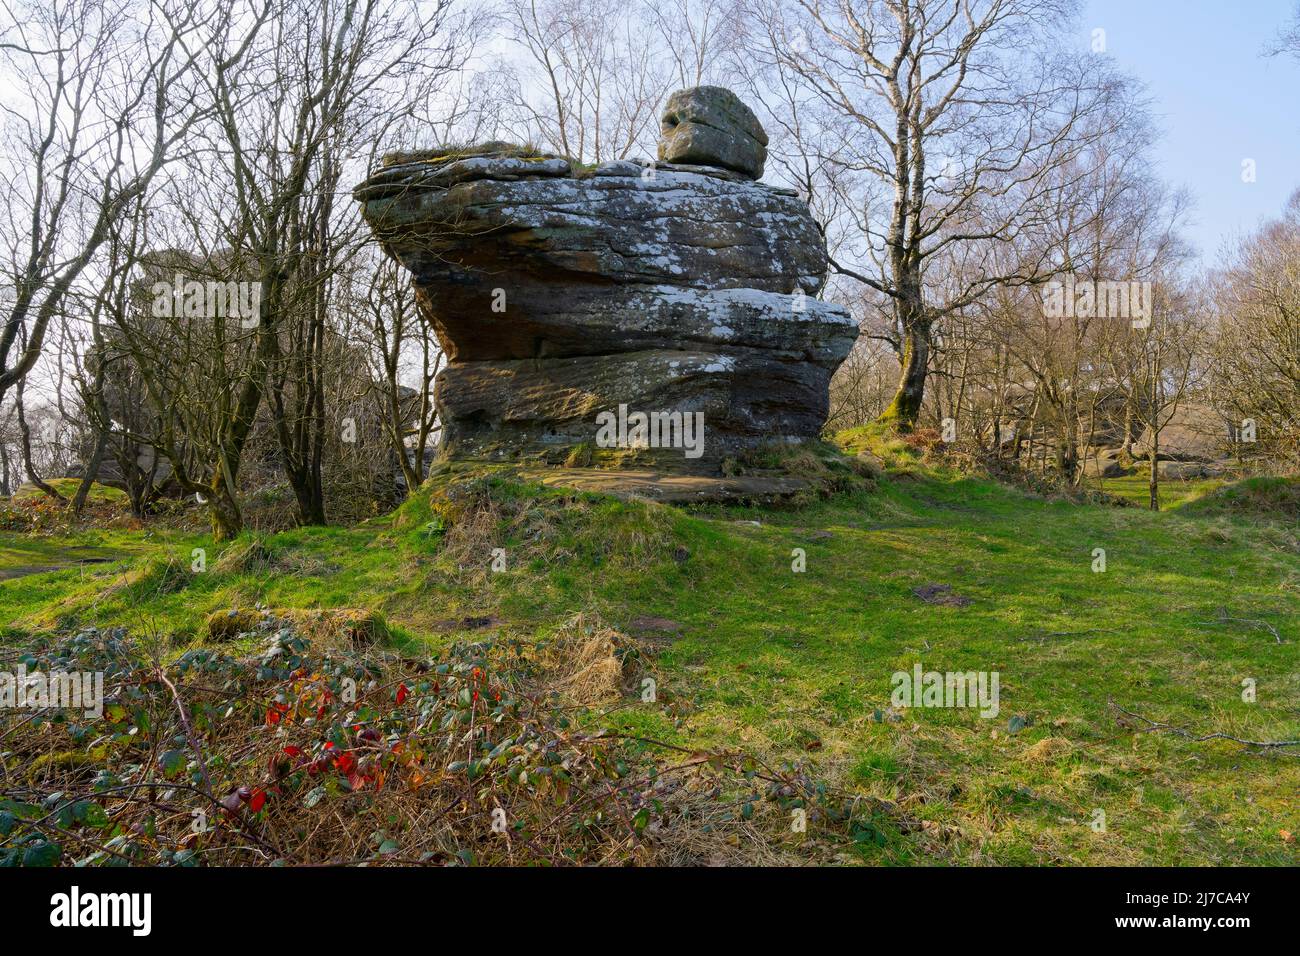 On a misty Yorkshire day a large lichen covered gritstone outcrop stands on a grass covered mound. Stock Photo